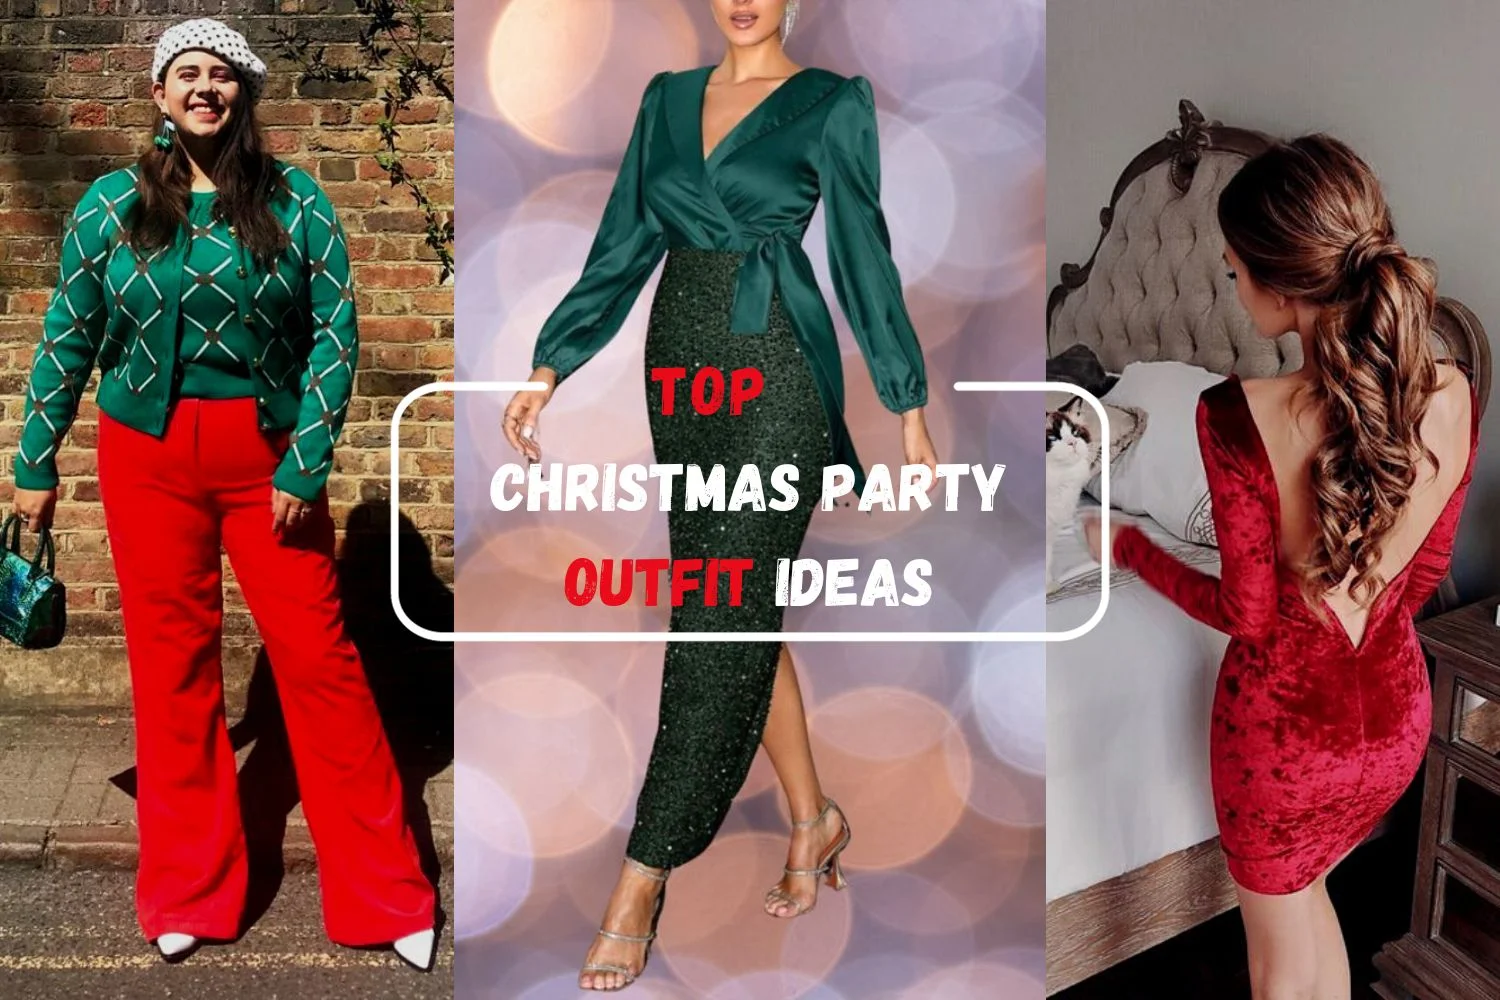 25 Top Christmas Party Outfits Ideas